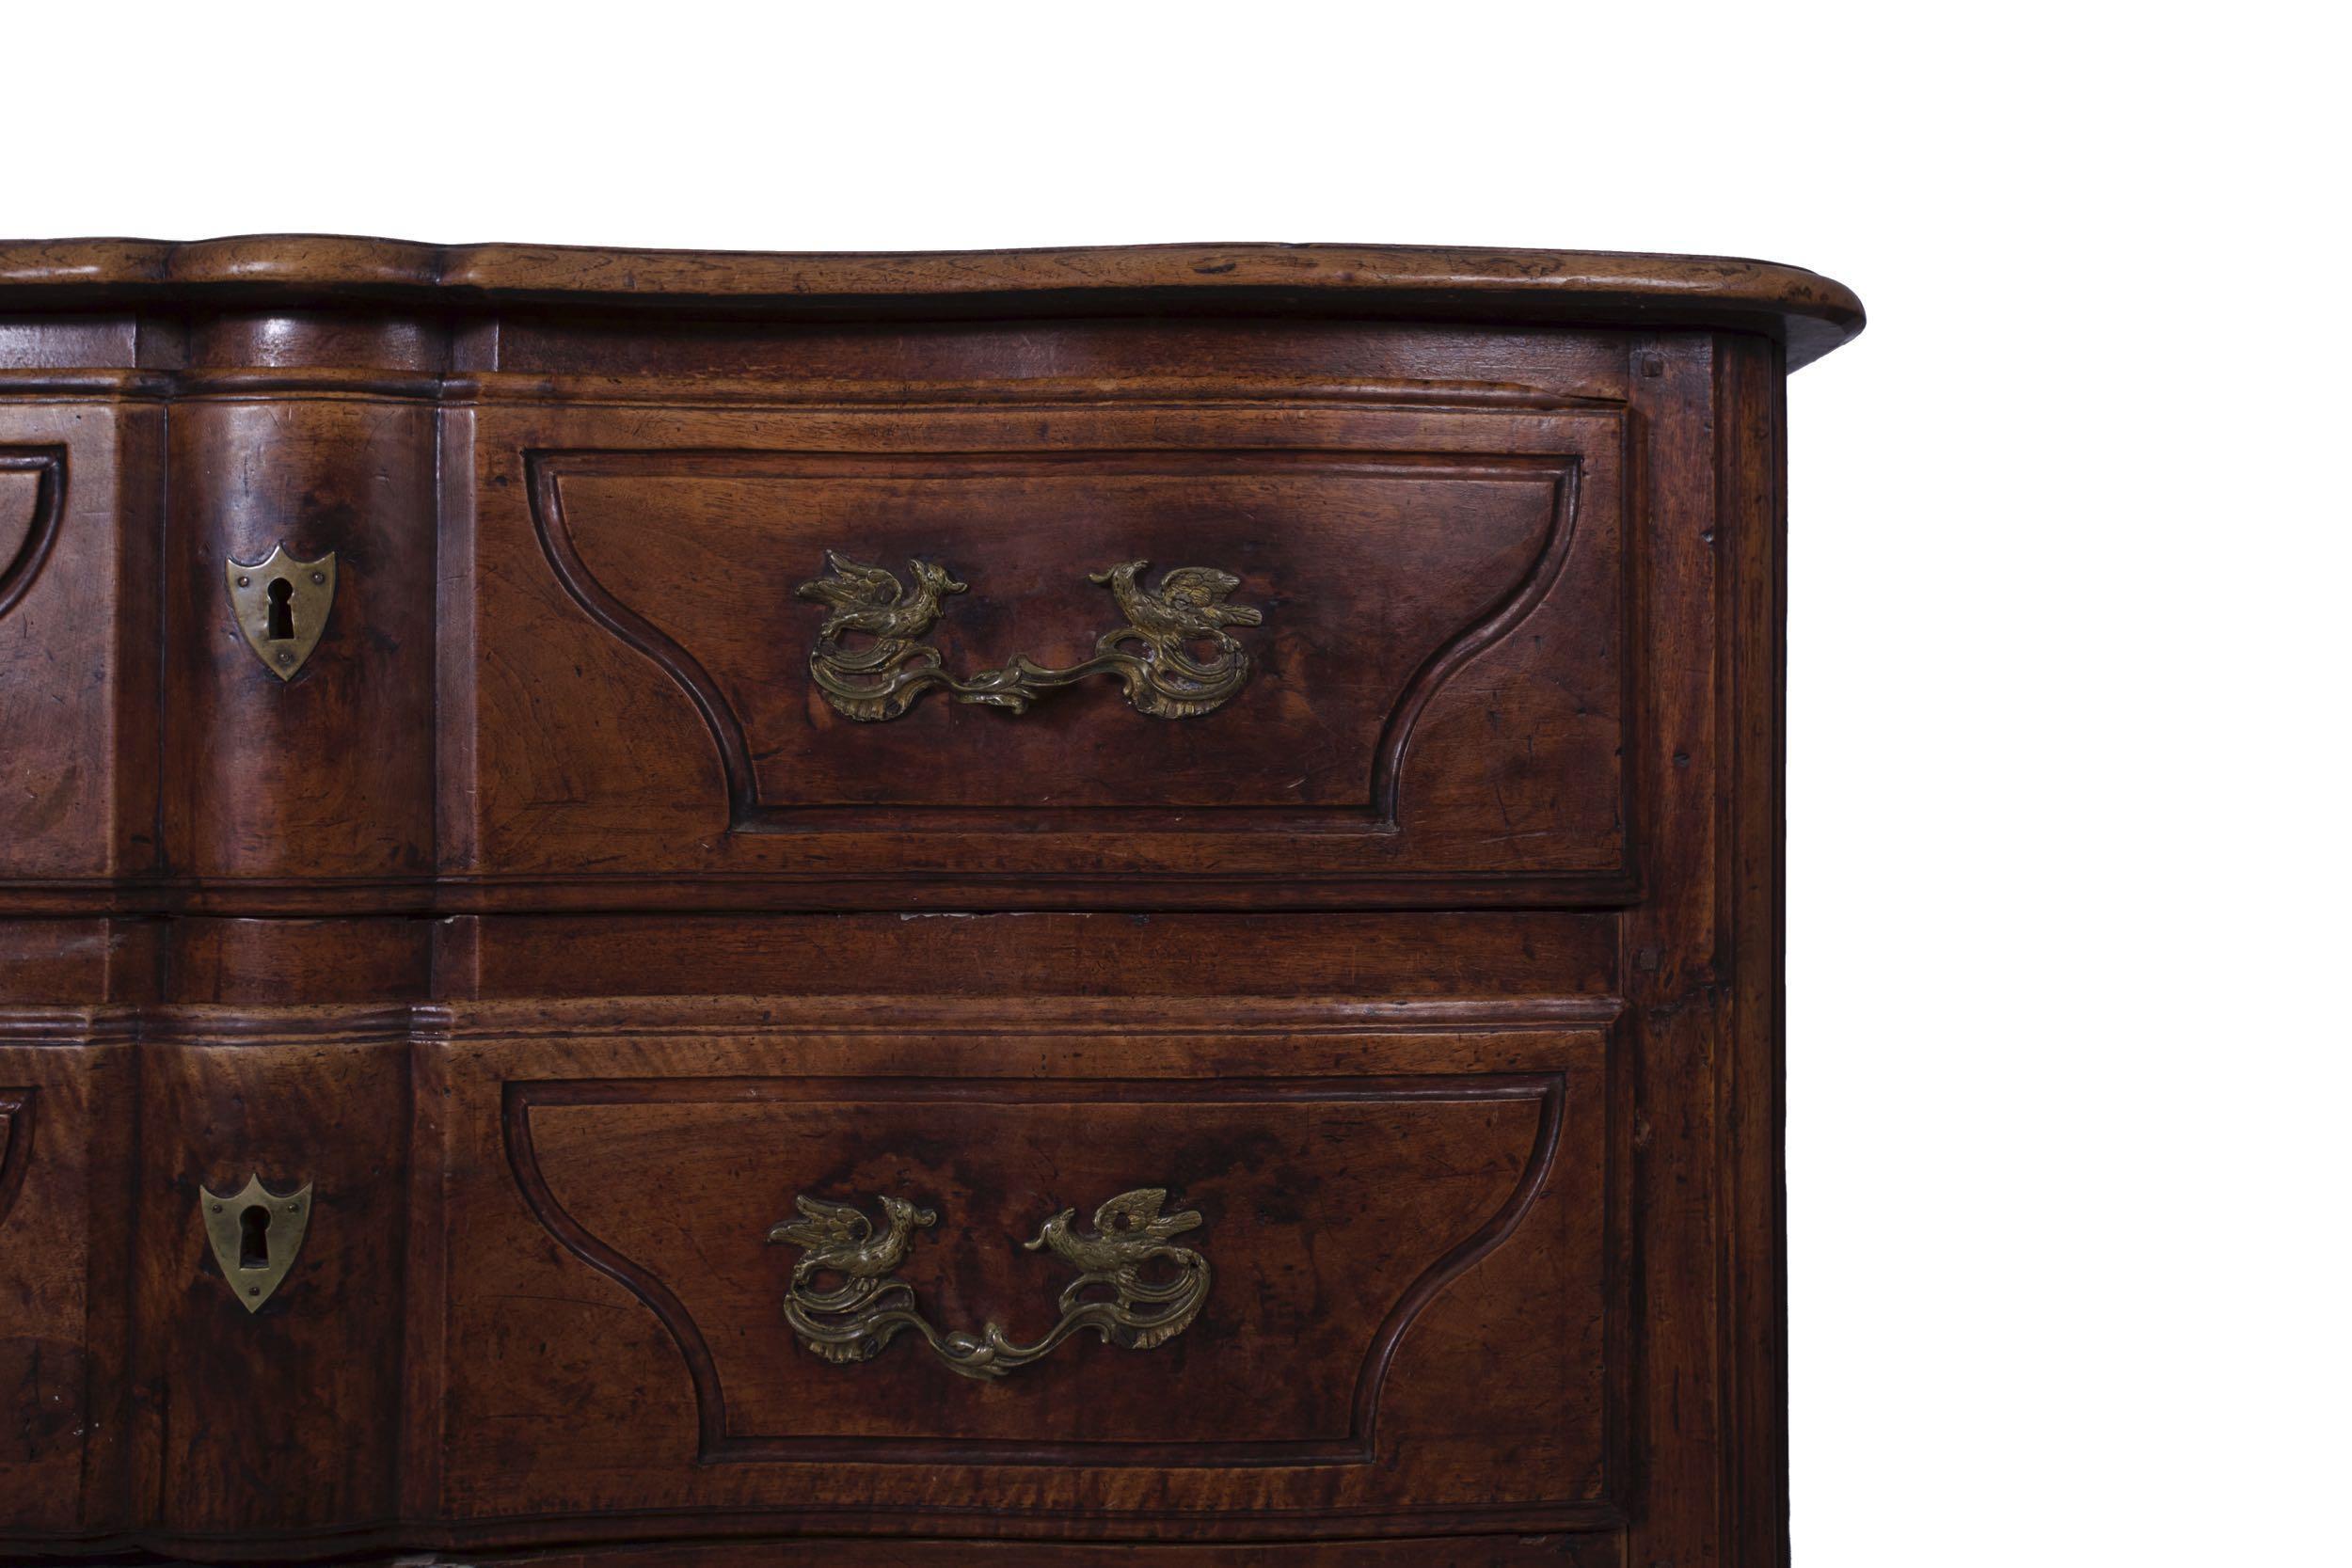 18th Century Regencé Period Walnut Commode Chest of Drawers, circa 1730-1750 For Sale 3